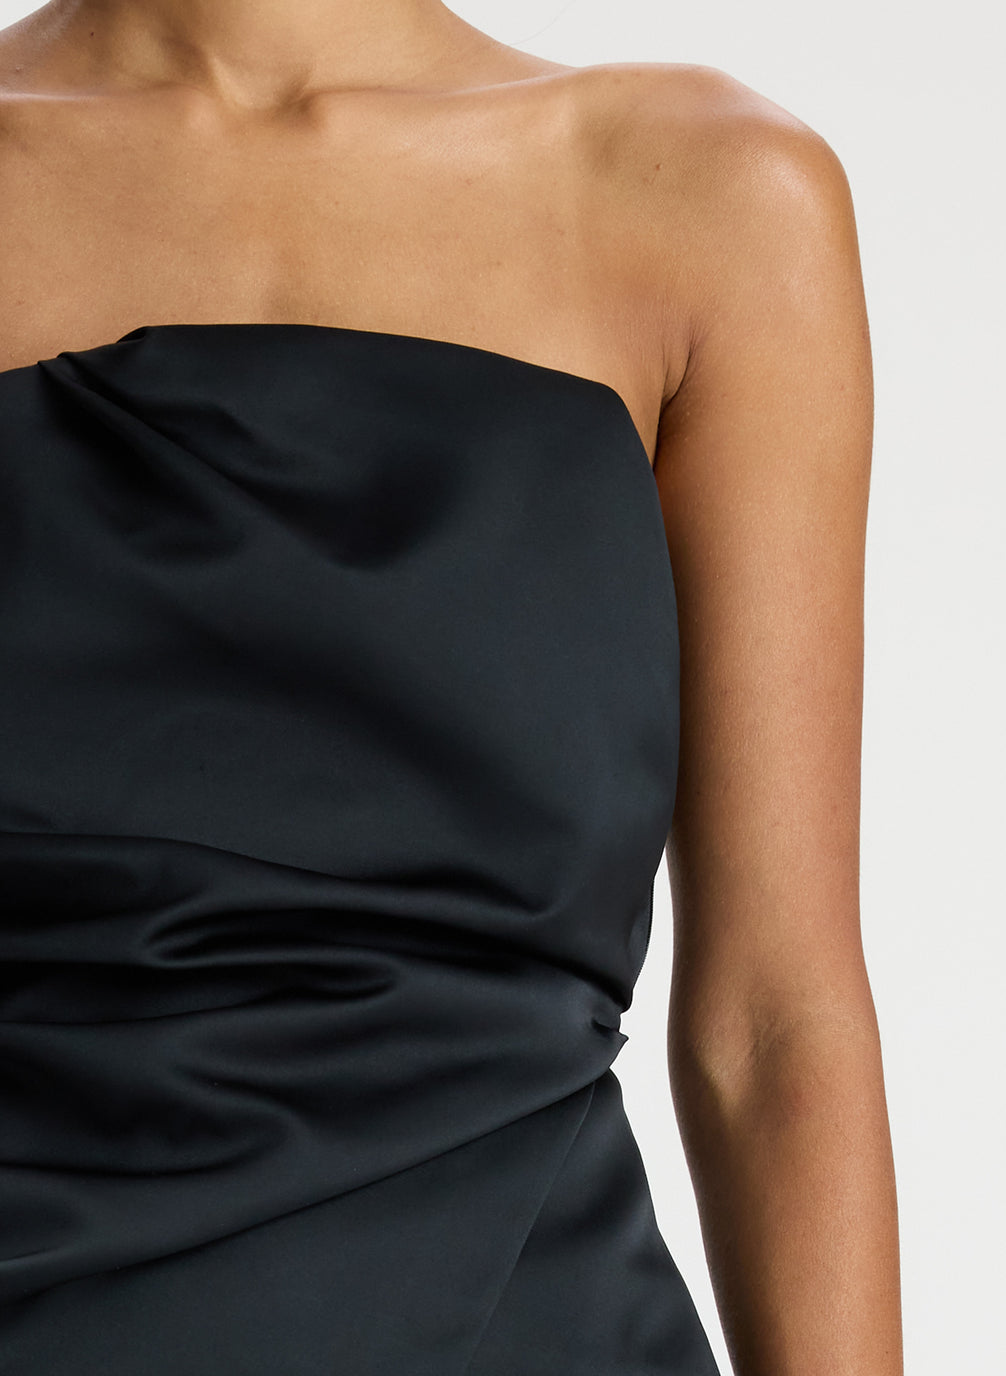 detail  view of woman wearing black strapless satin top and black pants